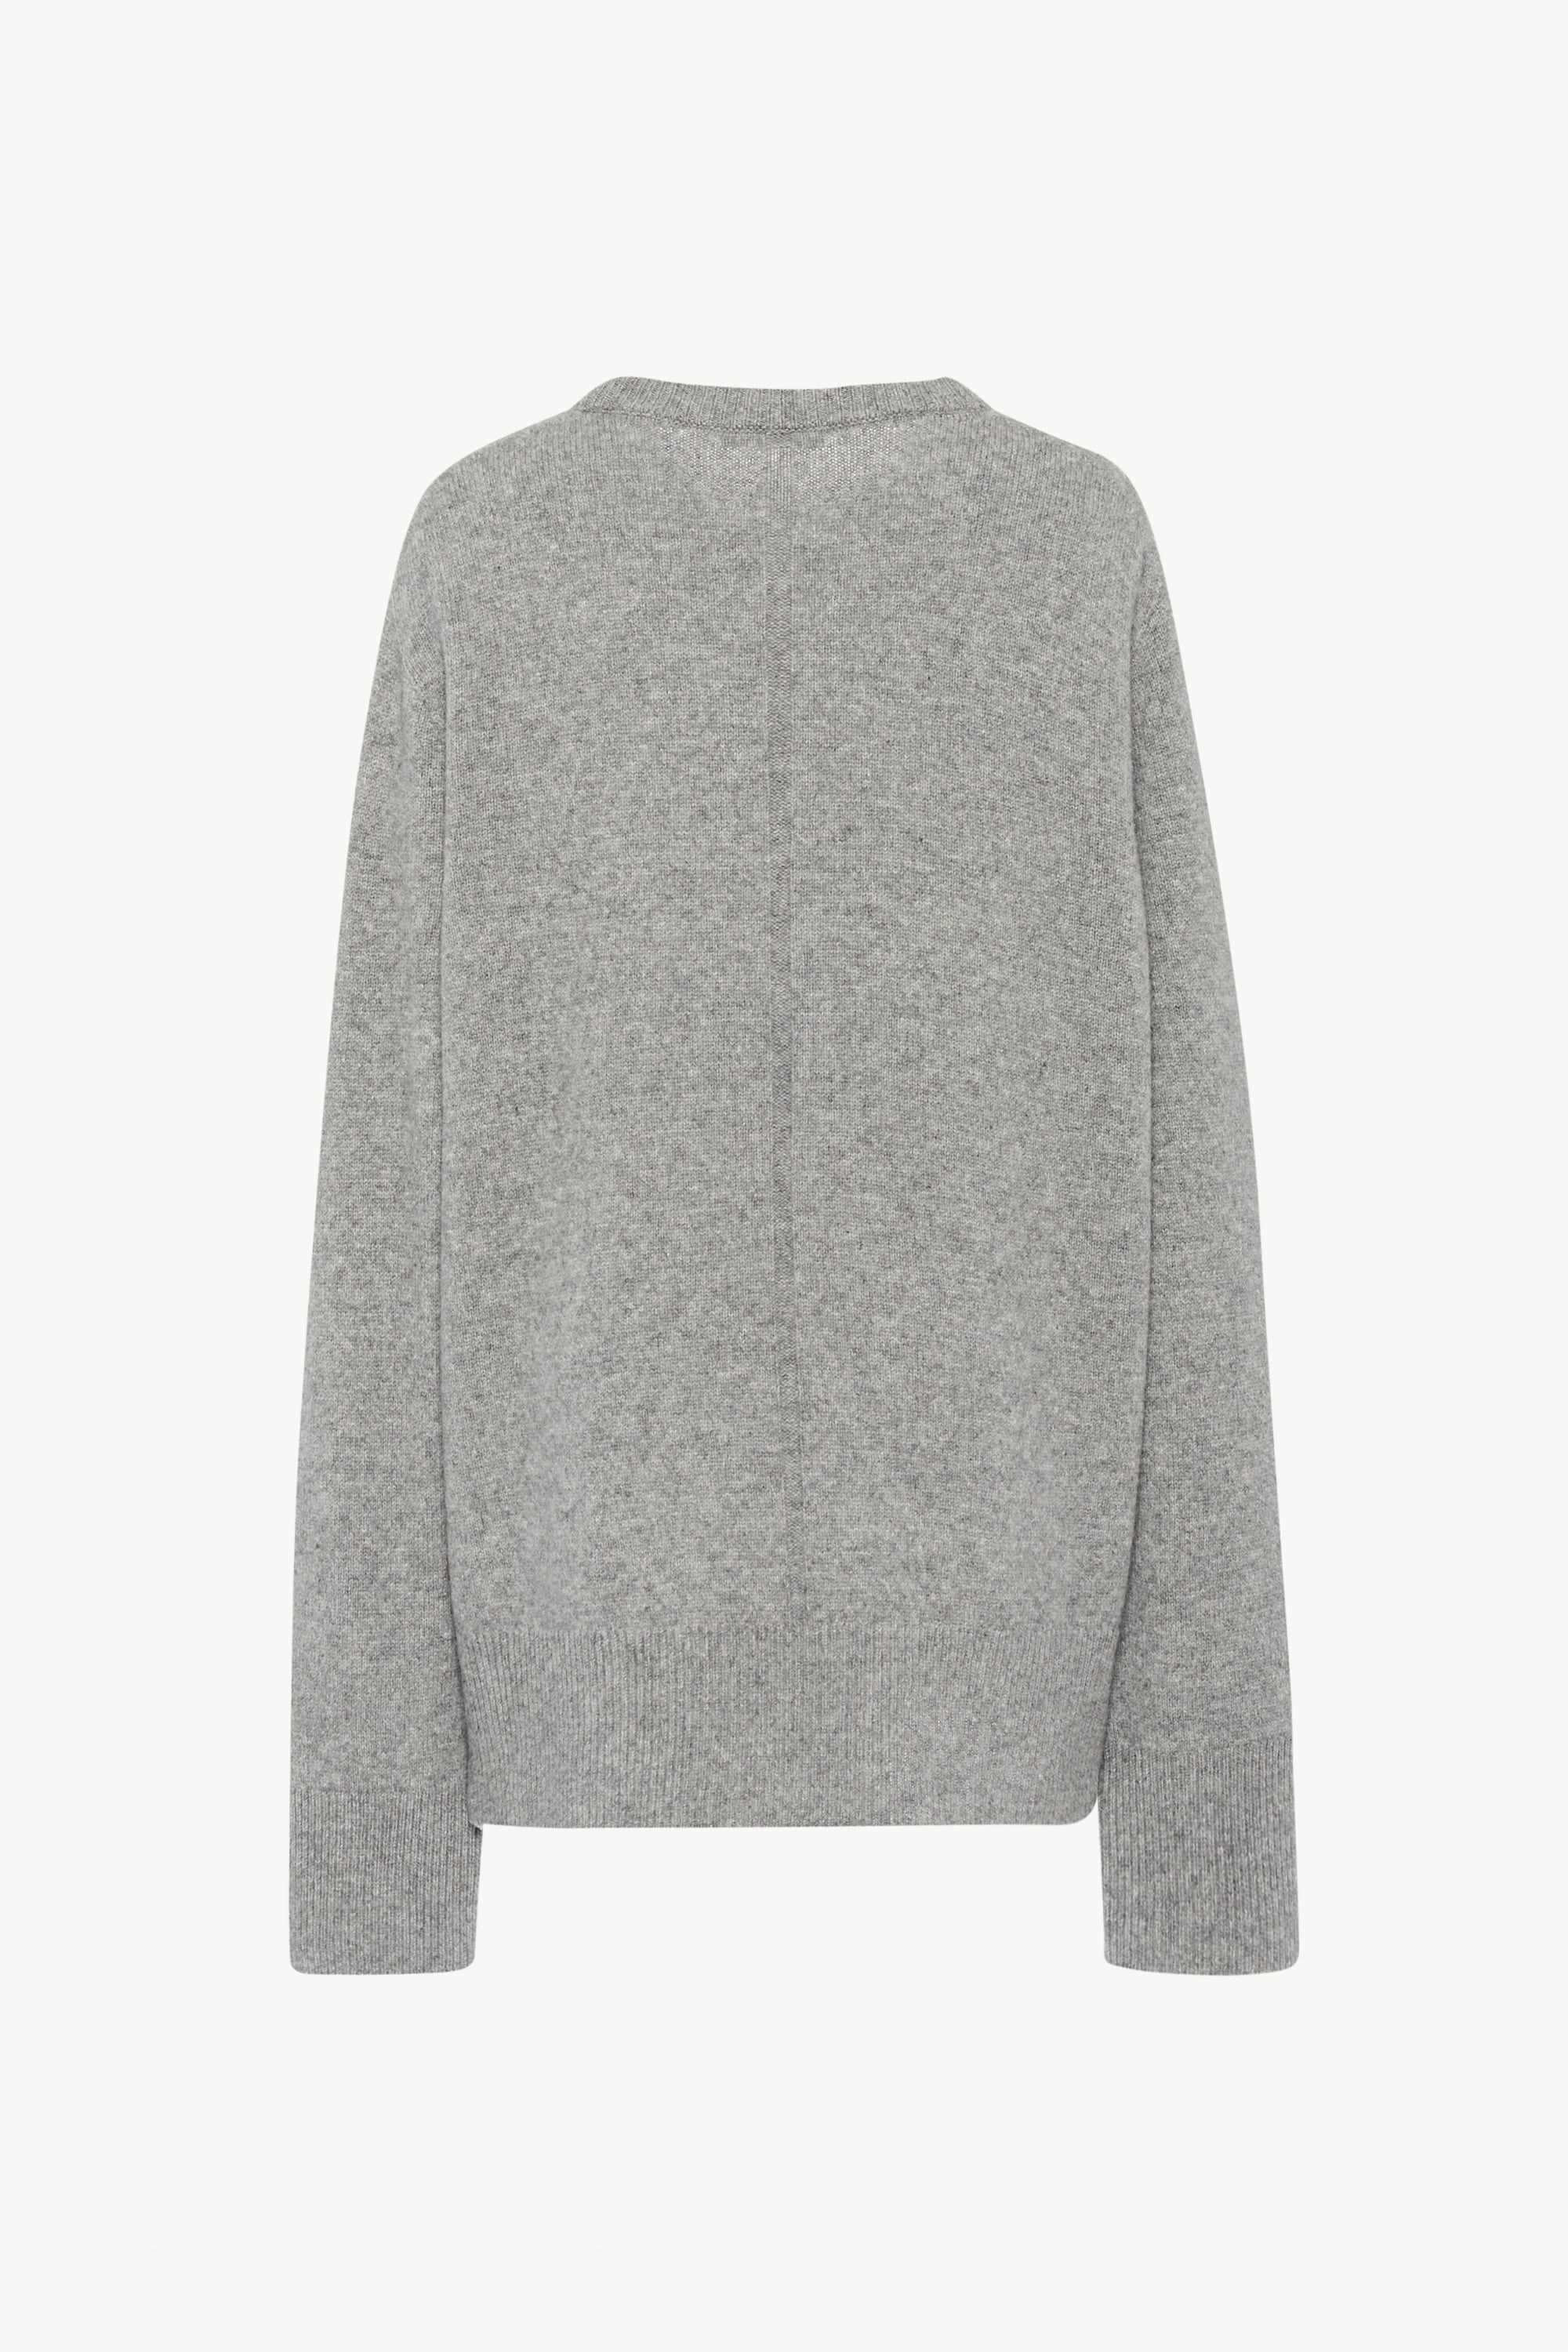 Sibem Top in Wool and Cashmere - 2